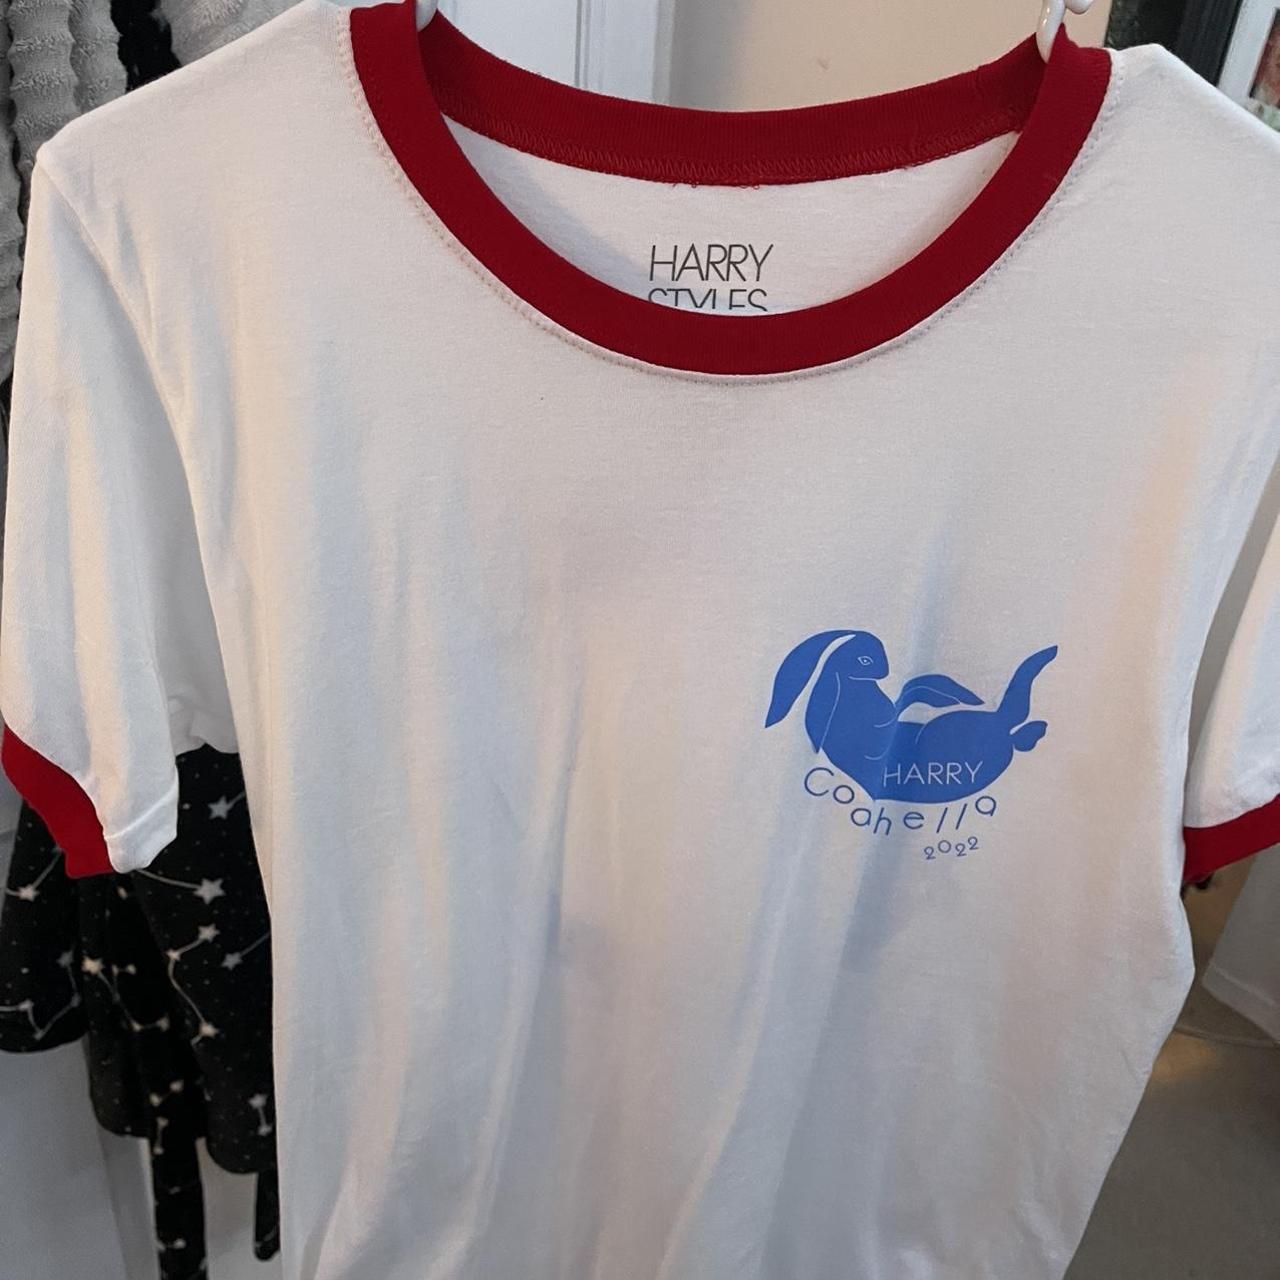 Harry's Women's White and Red T-shirt